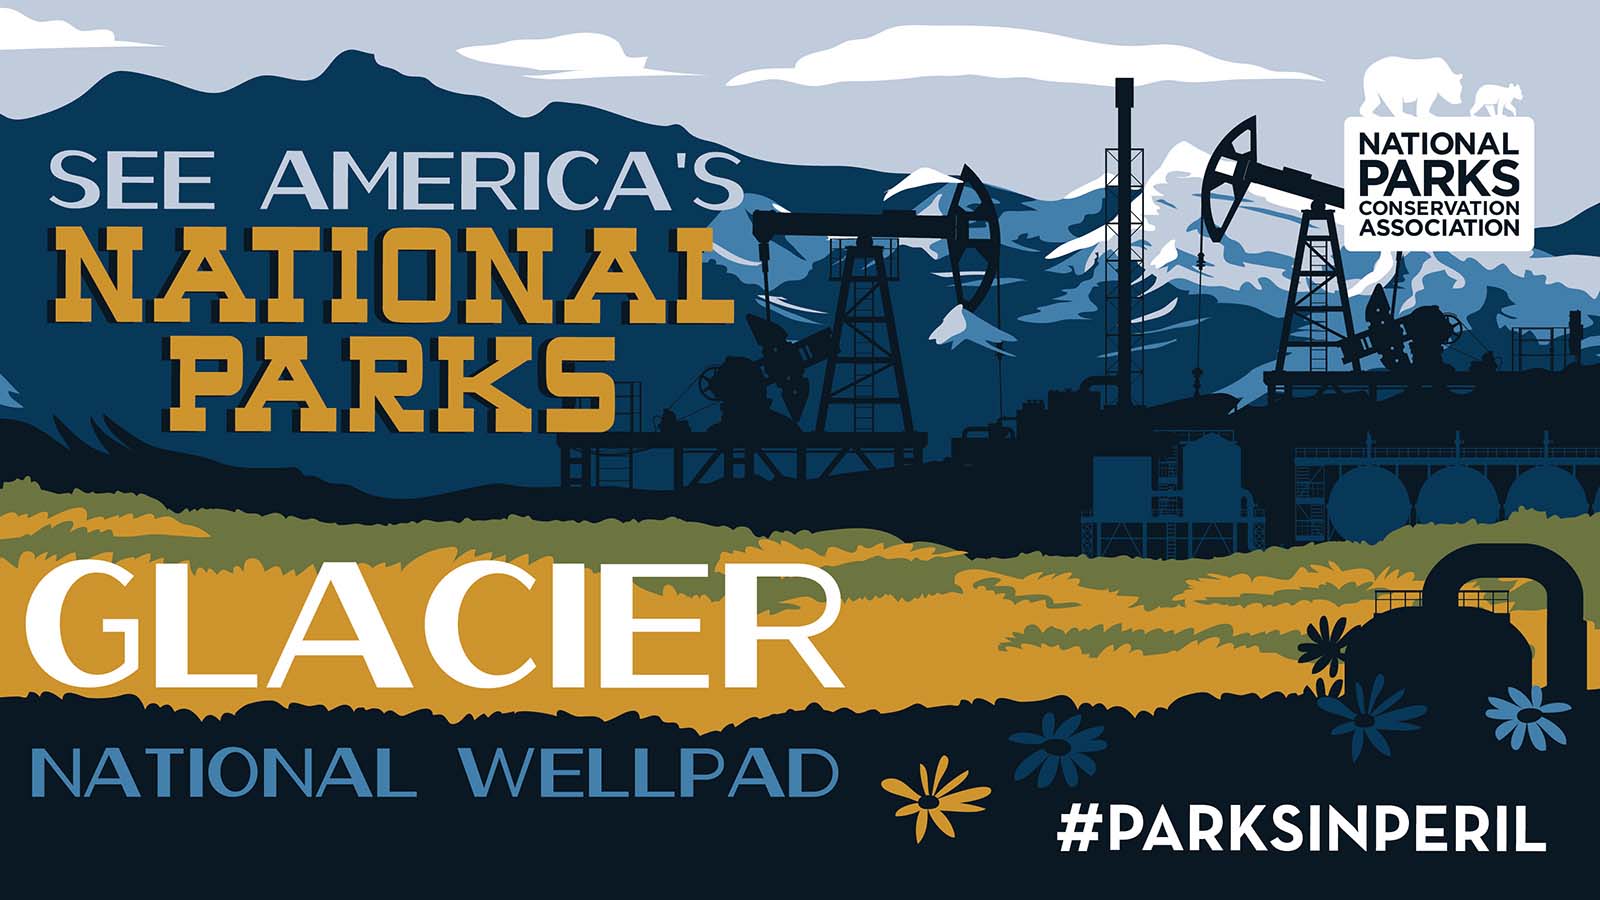 It’s time for us to choose the future of Glacier National Park’s borderlands: oil wells or wild nature?